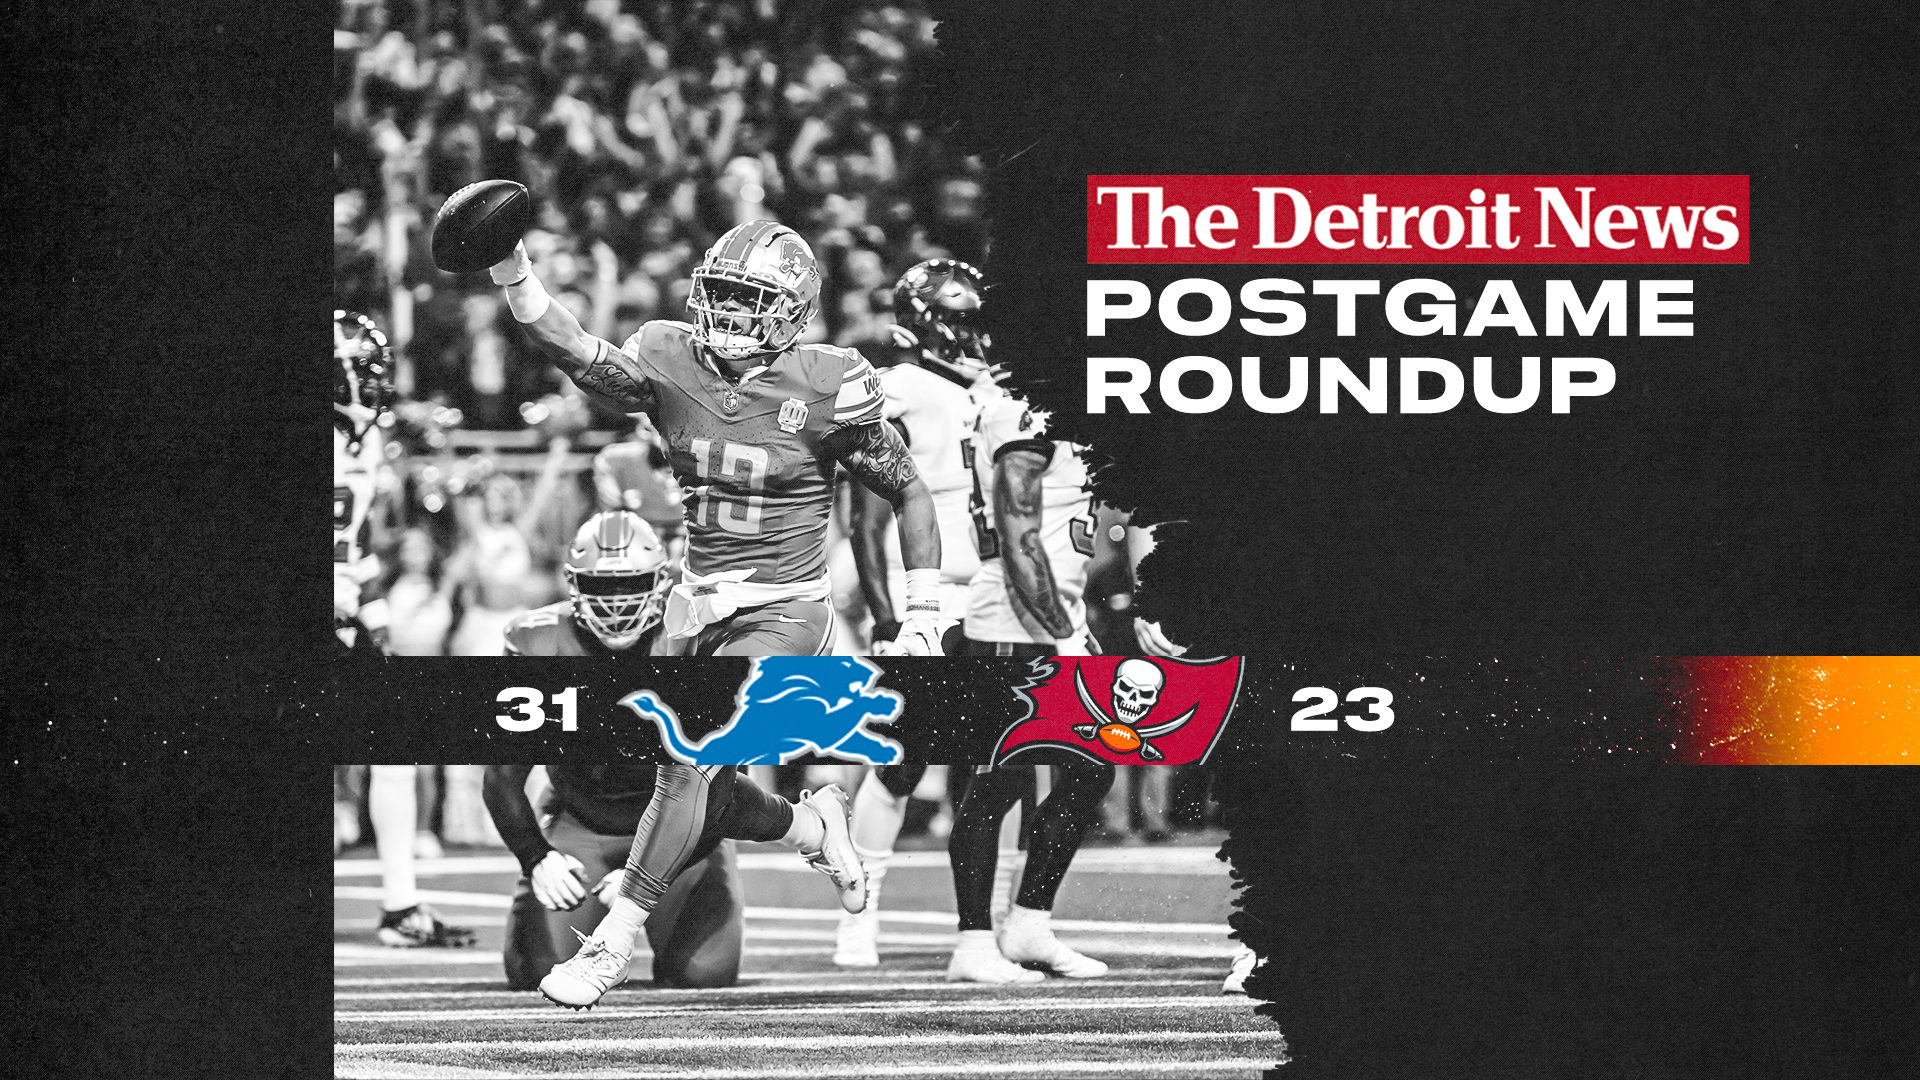 Here's a roundup from The Detroit News' coverage of the Detroit Lions' 31-23 divisional round win over the Tampa Bay Buccaneers at Ford Field in Detroit.